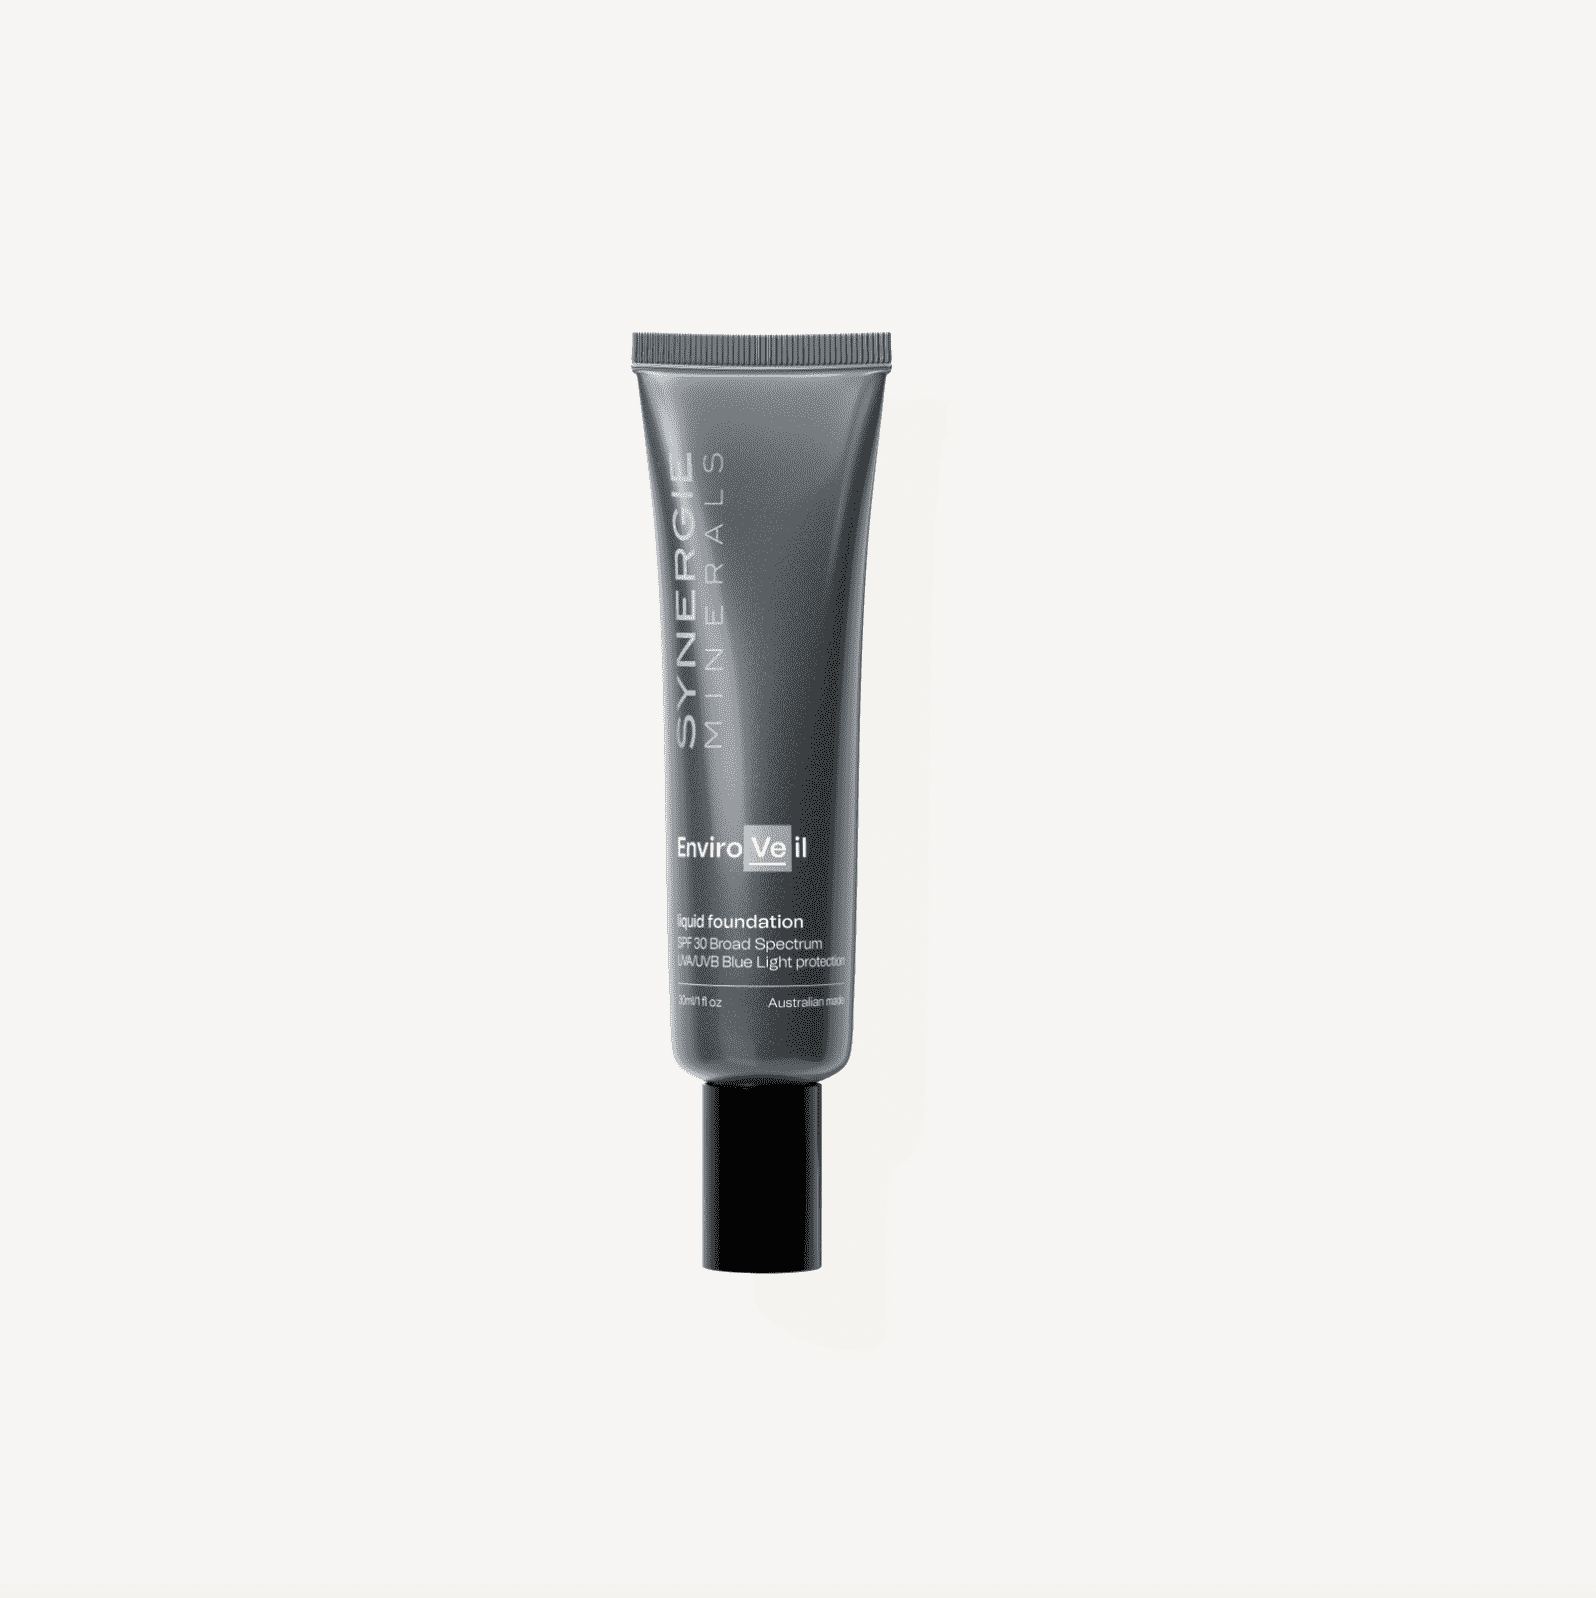 A tube of synergie minerals enviroveil ii nude foundation displayed upright against a white background. the packaging is sleek and black with white text detailing the product information.